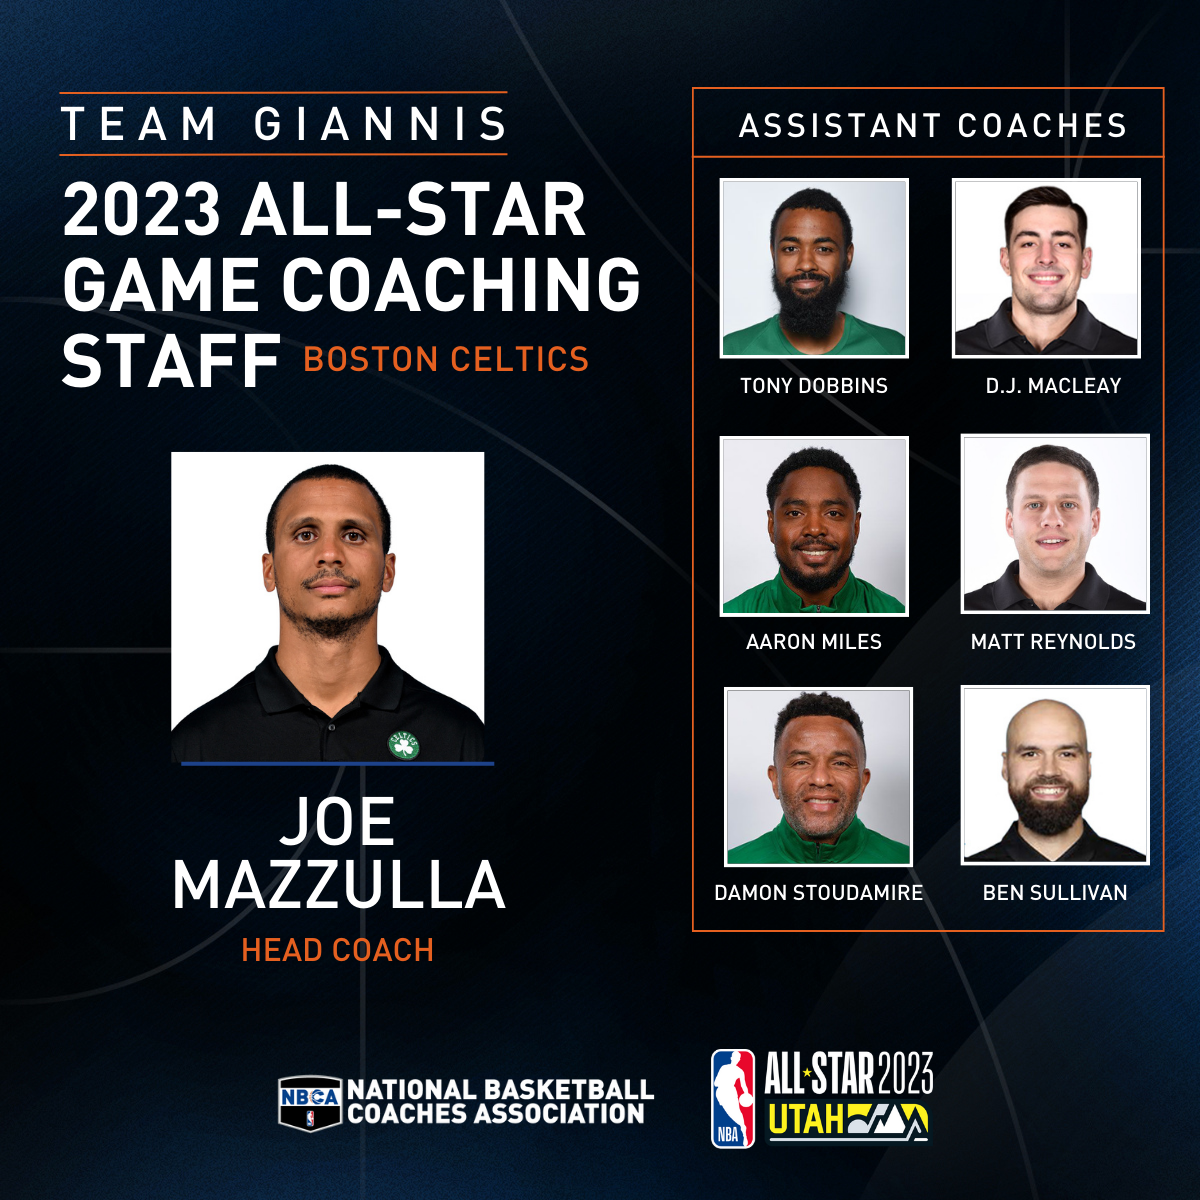 Joe Mazzulla and Boston Celtics Coaching Staff to Coach 'Team Giannis' in  2023 NBA All-Star Game | The Official Website of The NBA Coaches Association